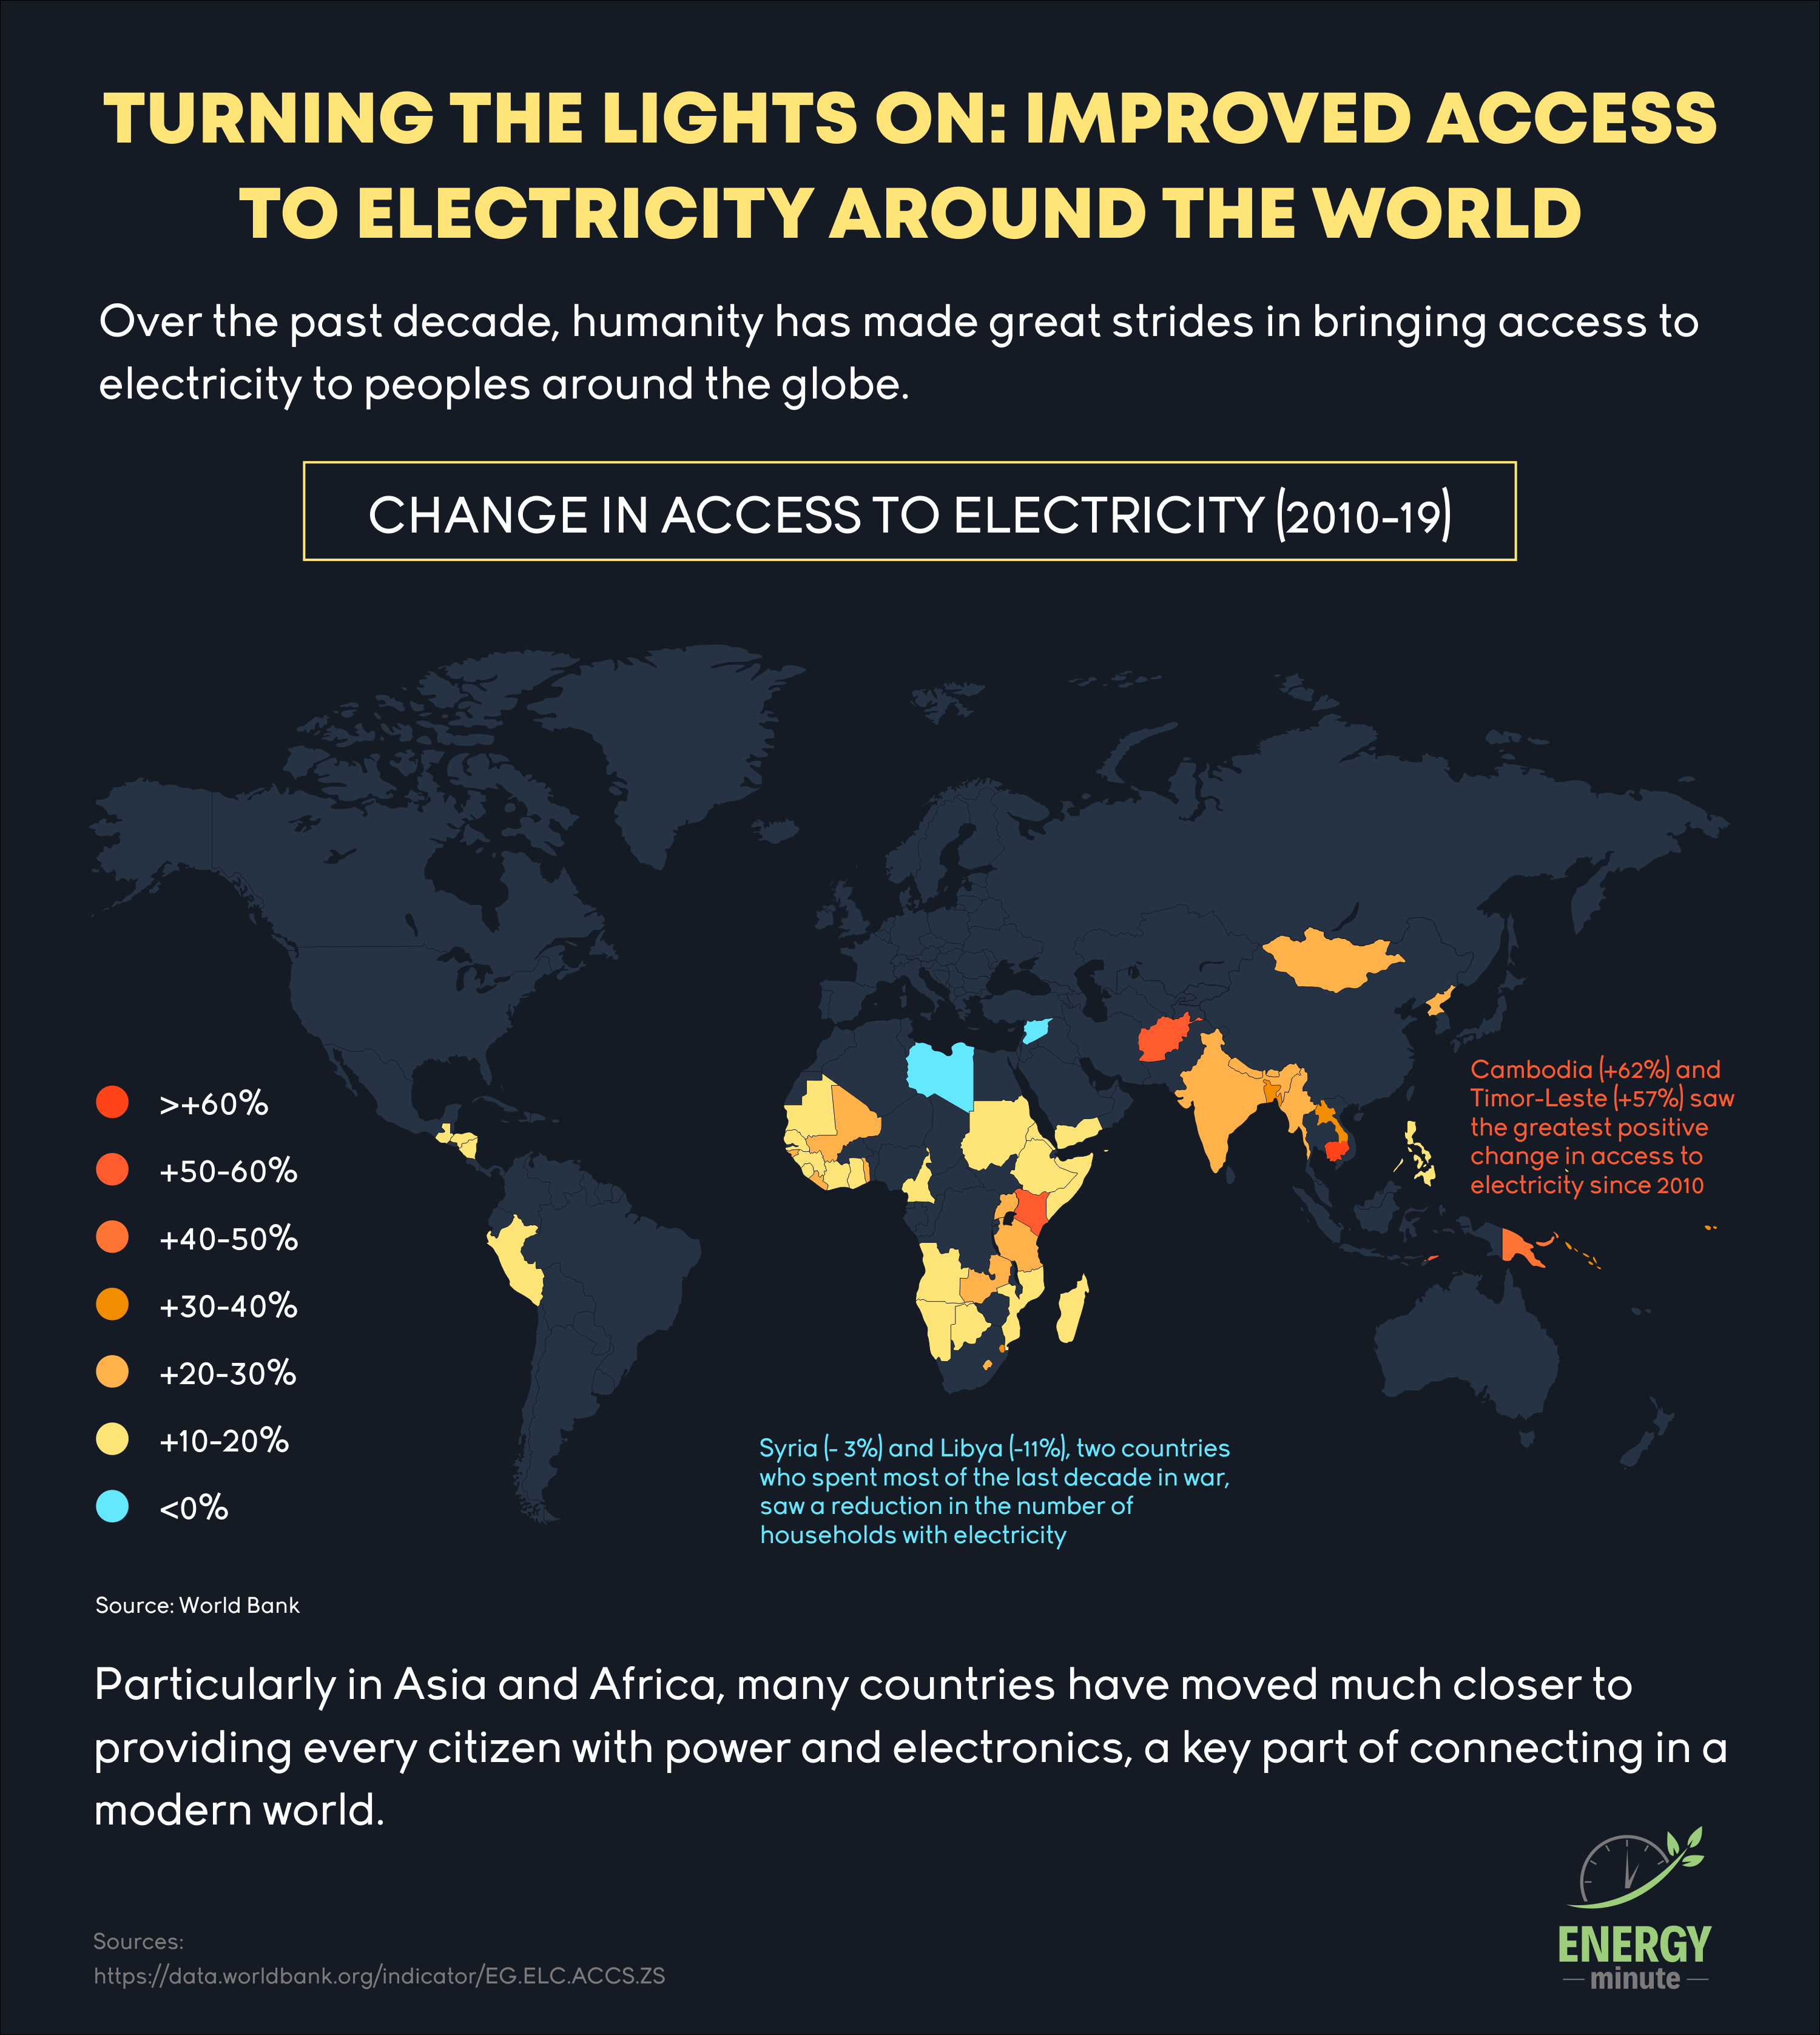 Turning the Lights On: Access to Electricity Over the Last Decade